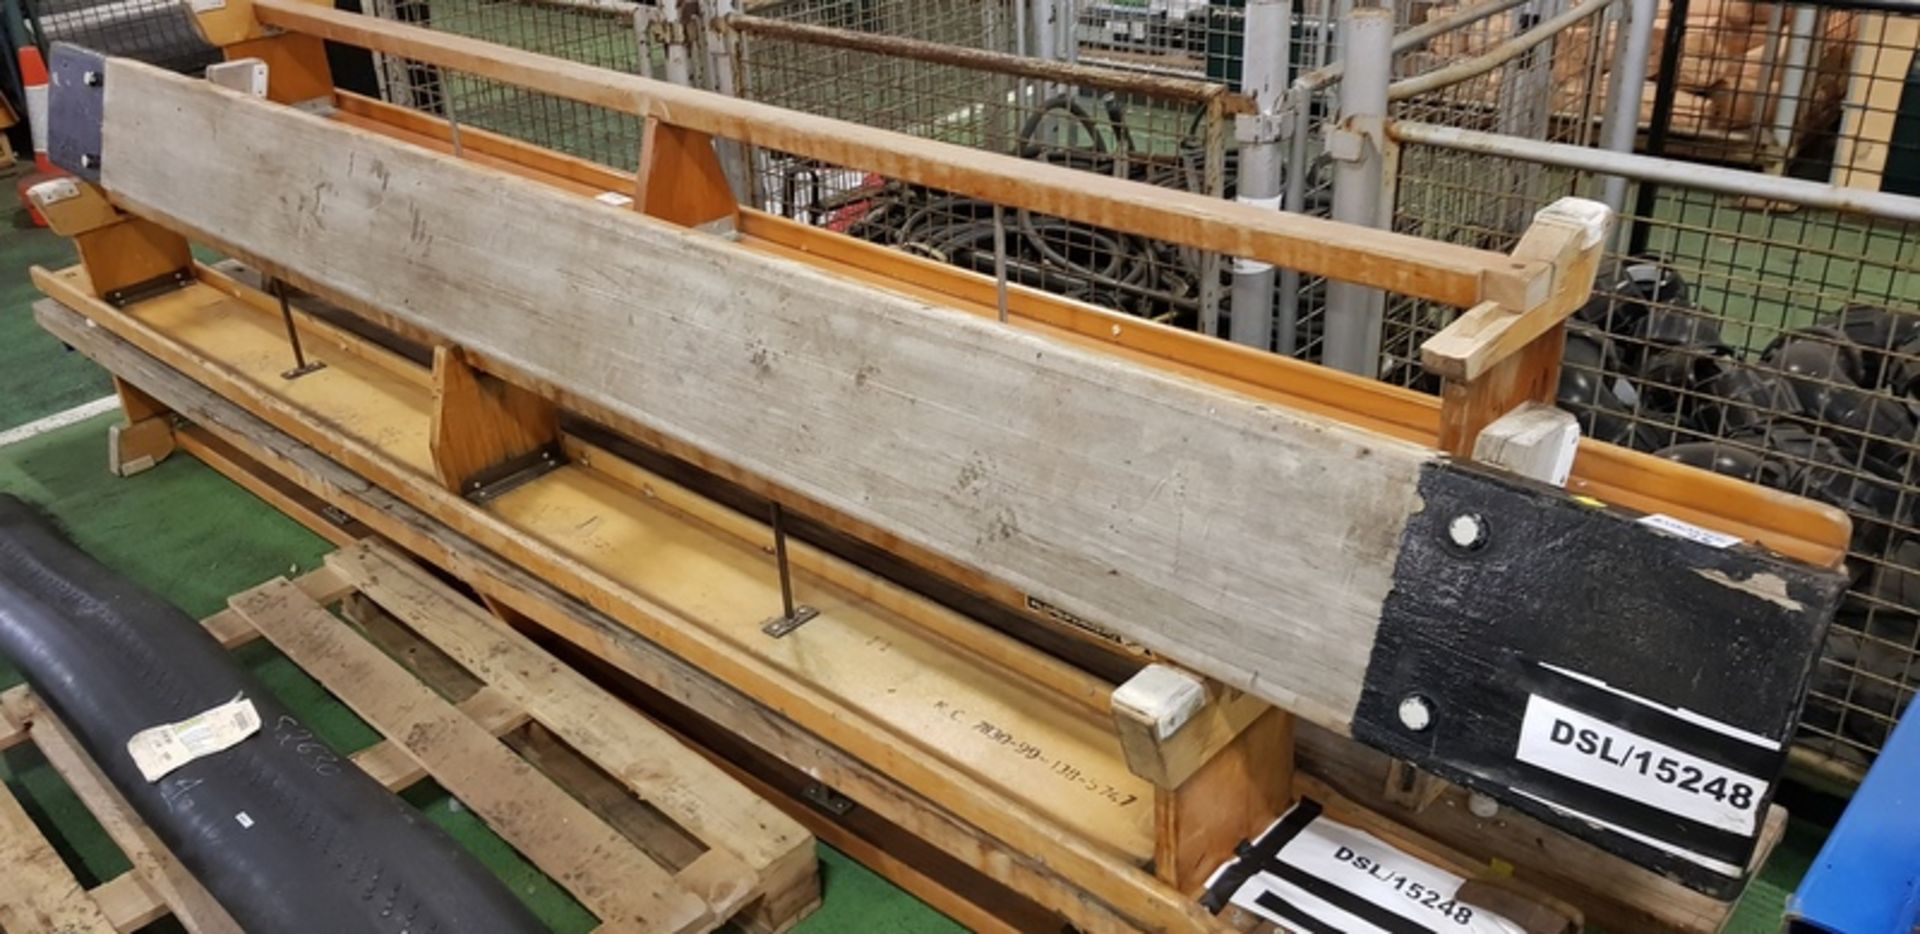 6x School Gym Benches - Image 2 of 2